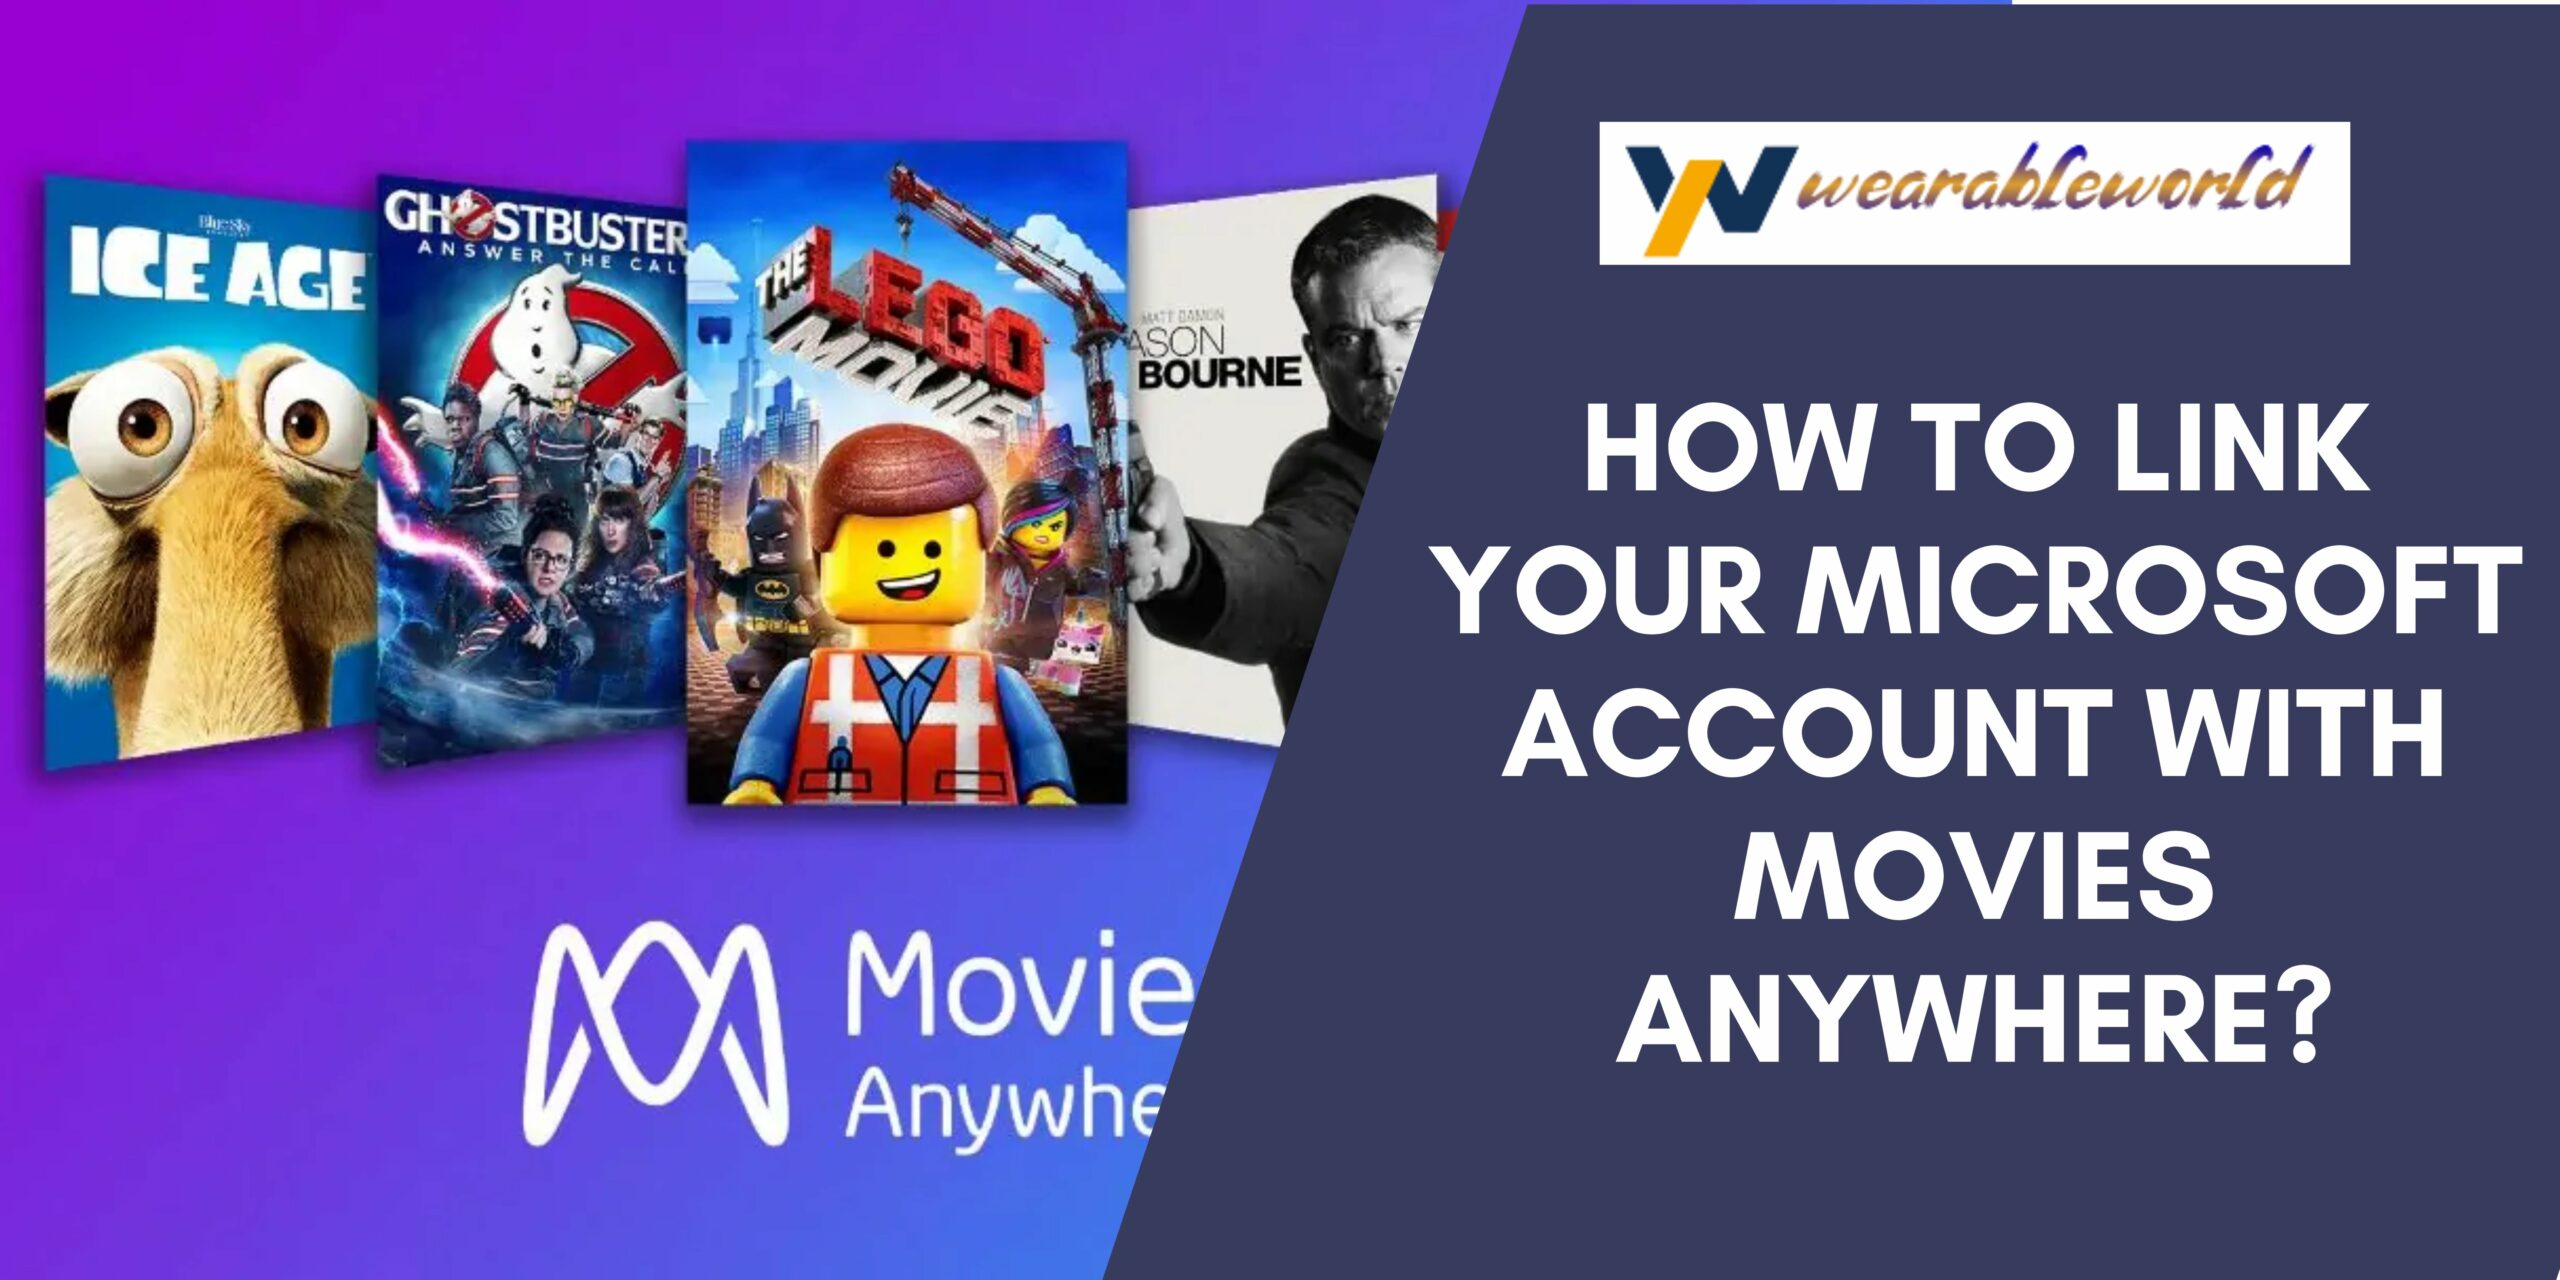 Link Your Microsoft Account With Movies Anywhere